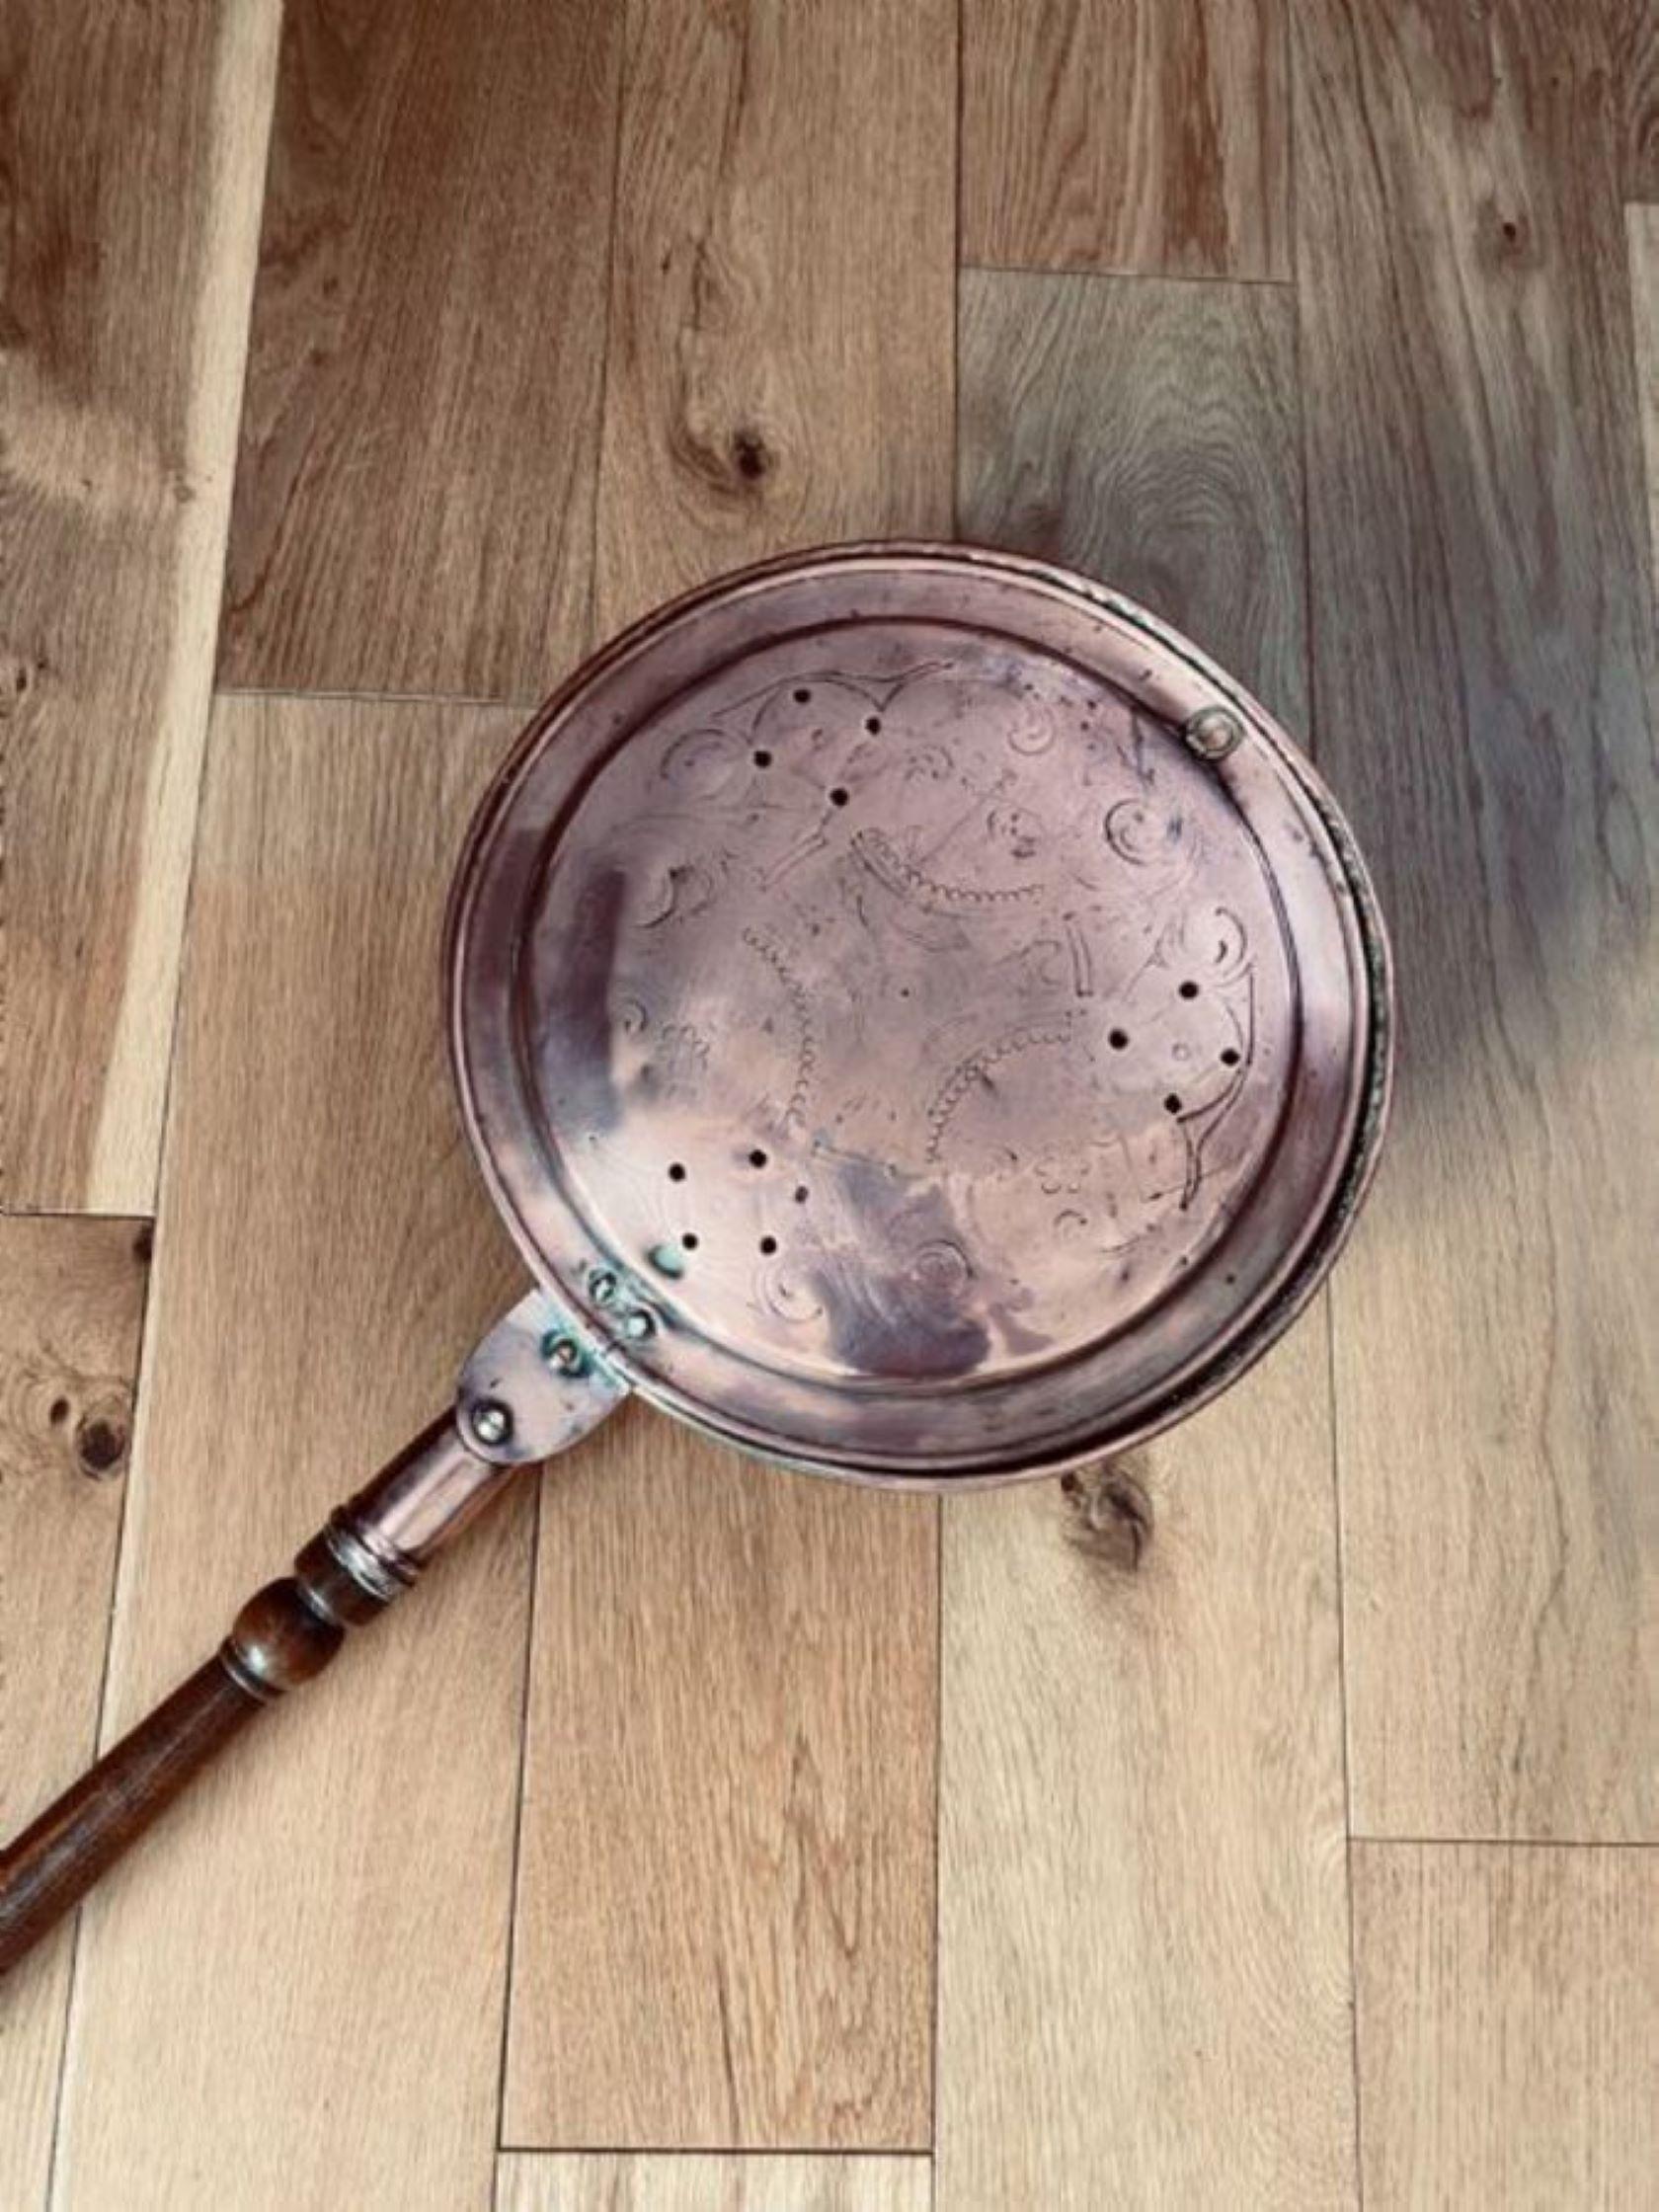 Antique George III copper warming pan having the original turned handle, copper warming pan with a lift up lid

D. 1800